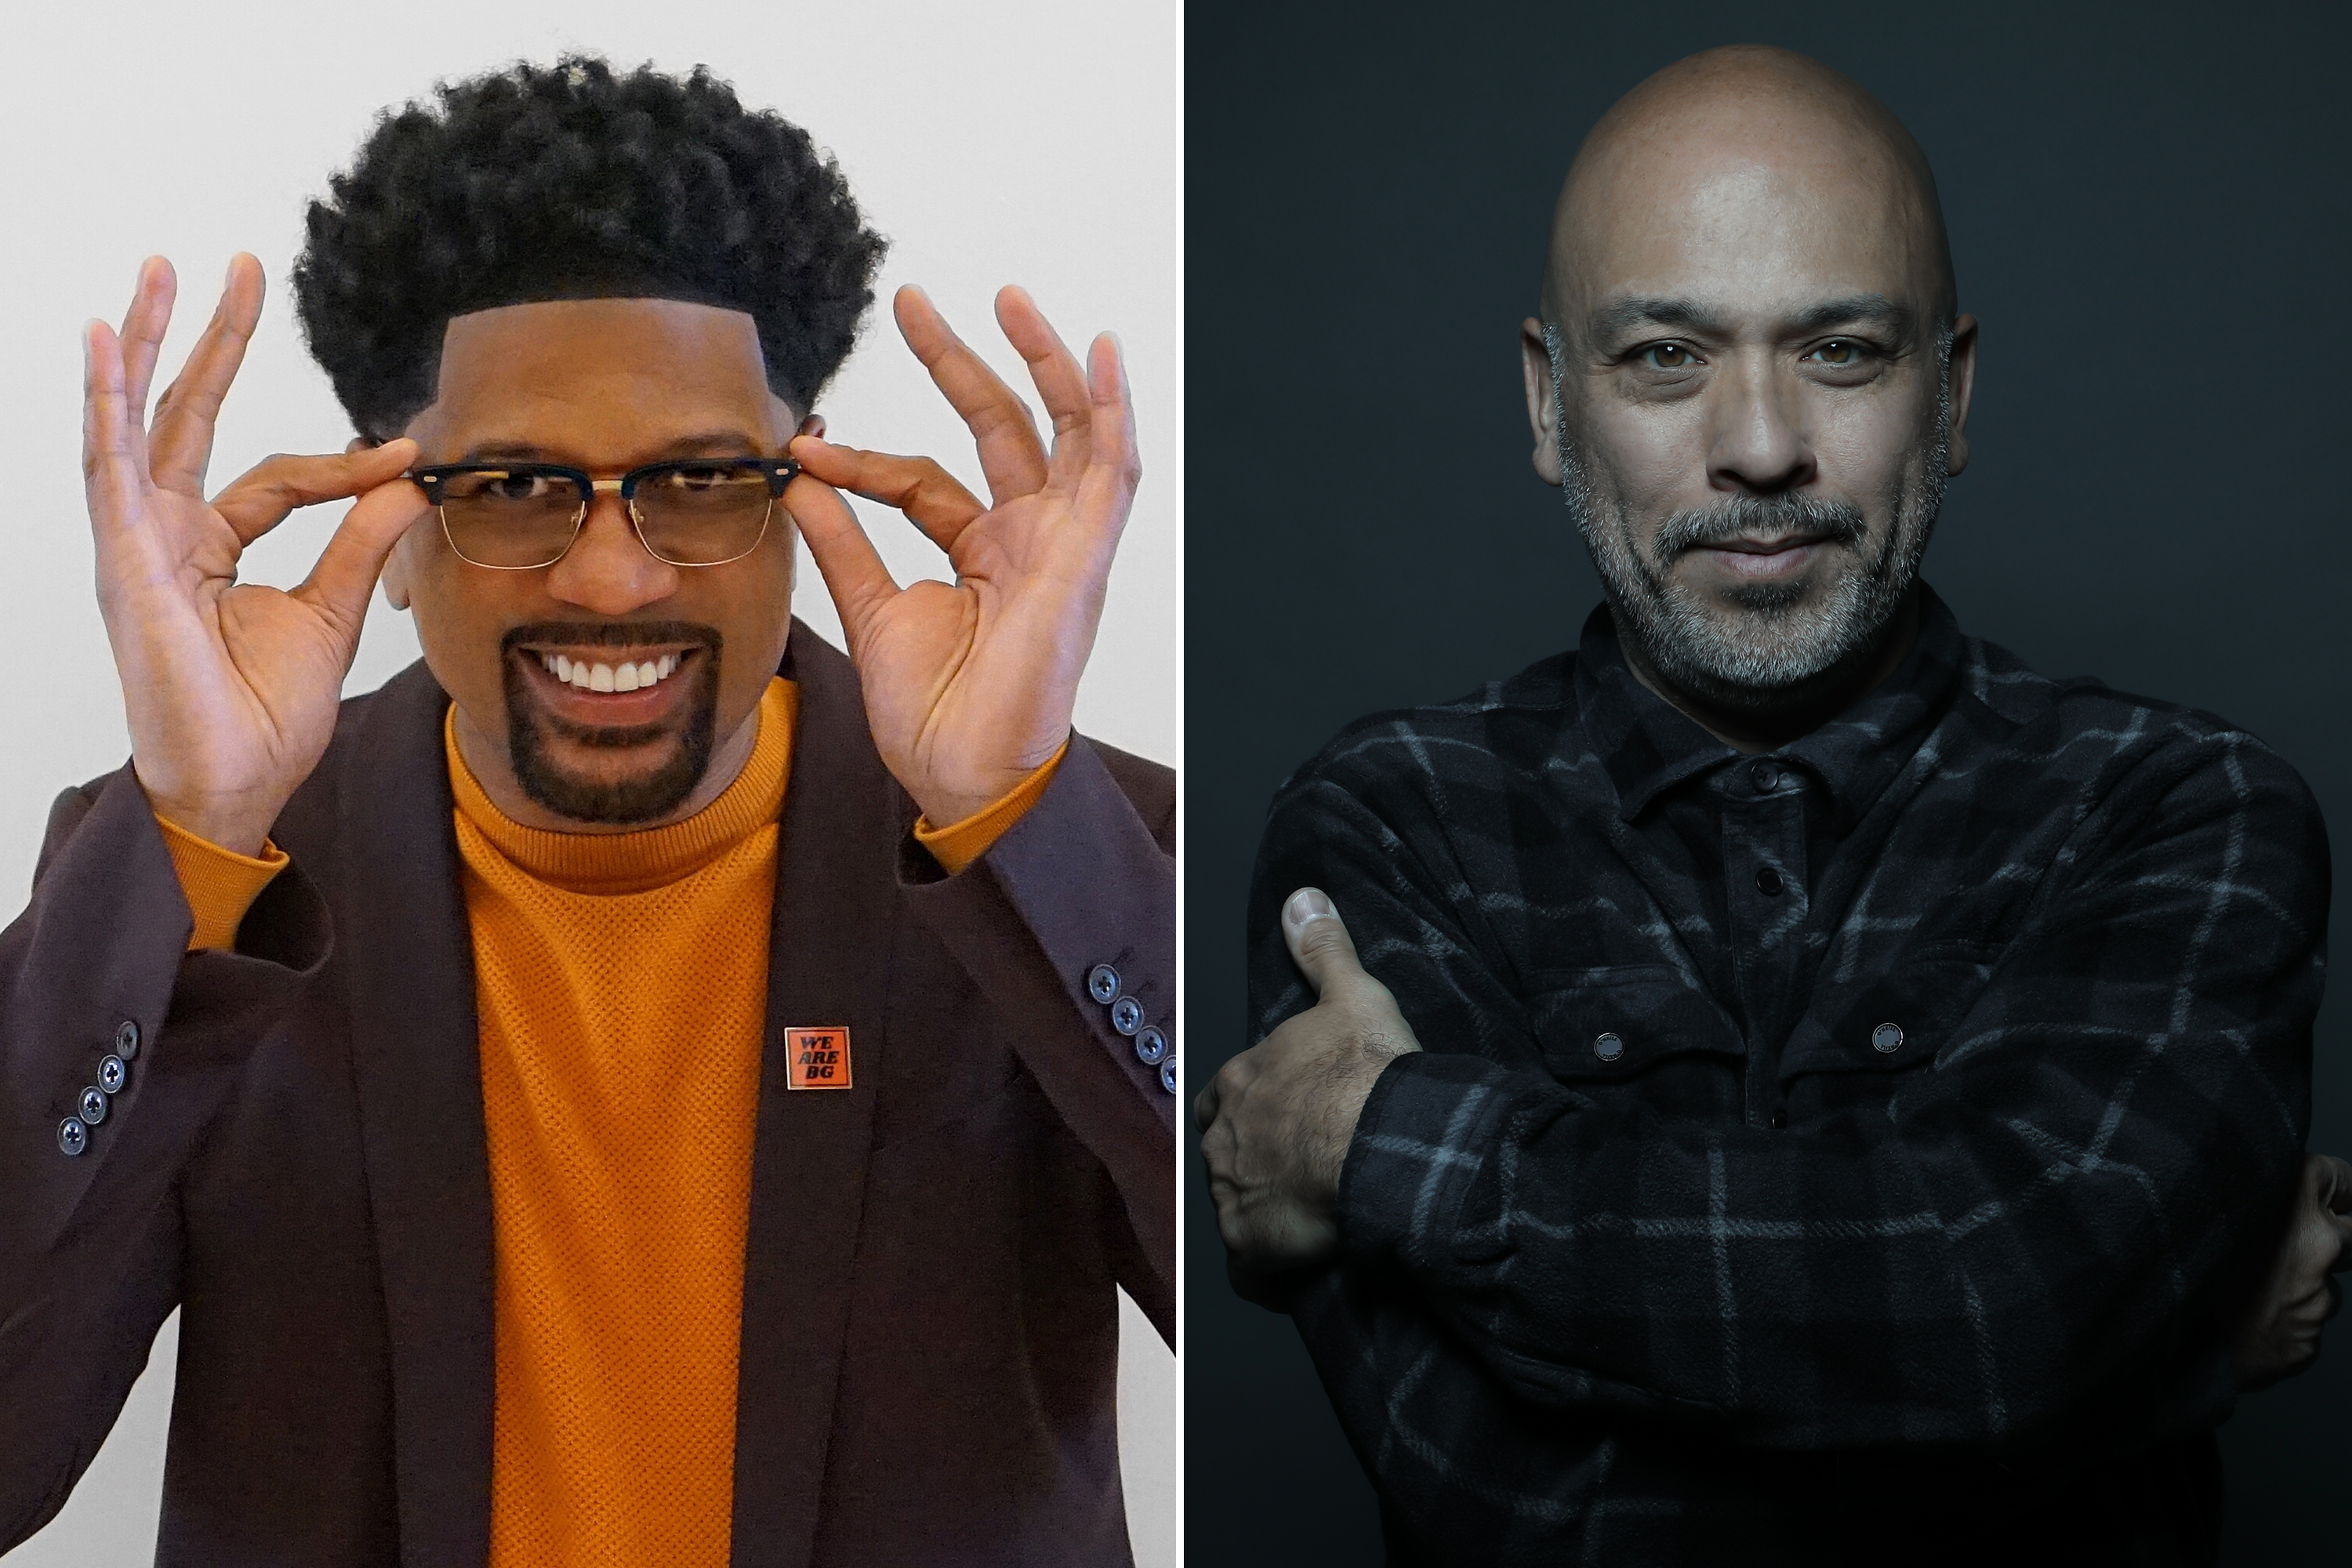 "Easter Sunday" star Jo Koy tells Jalen about his big breaks in comedy.